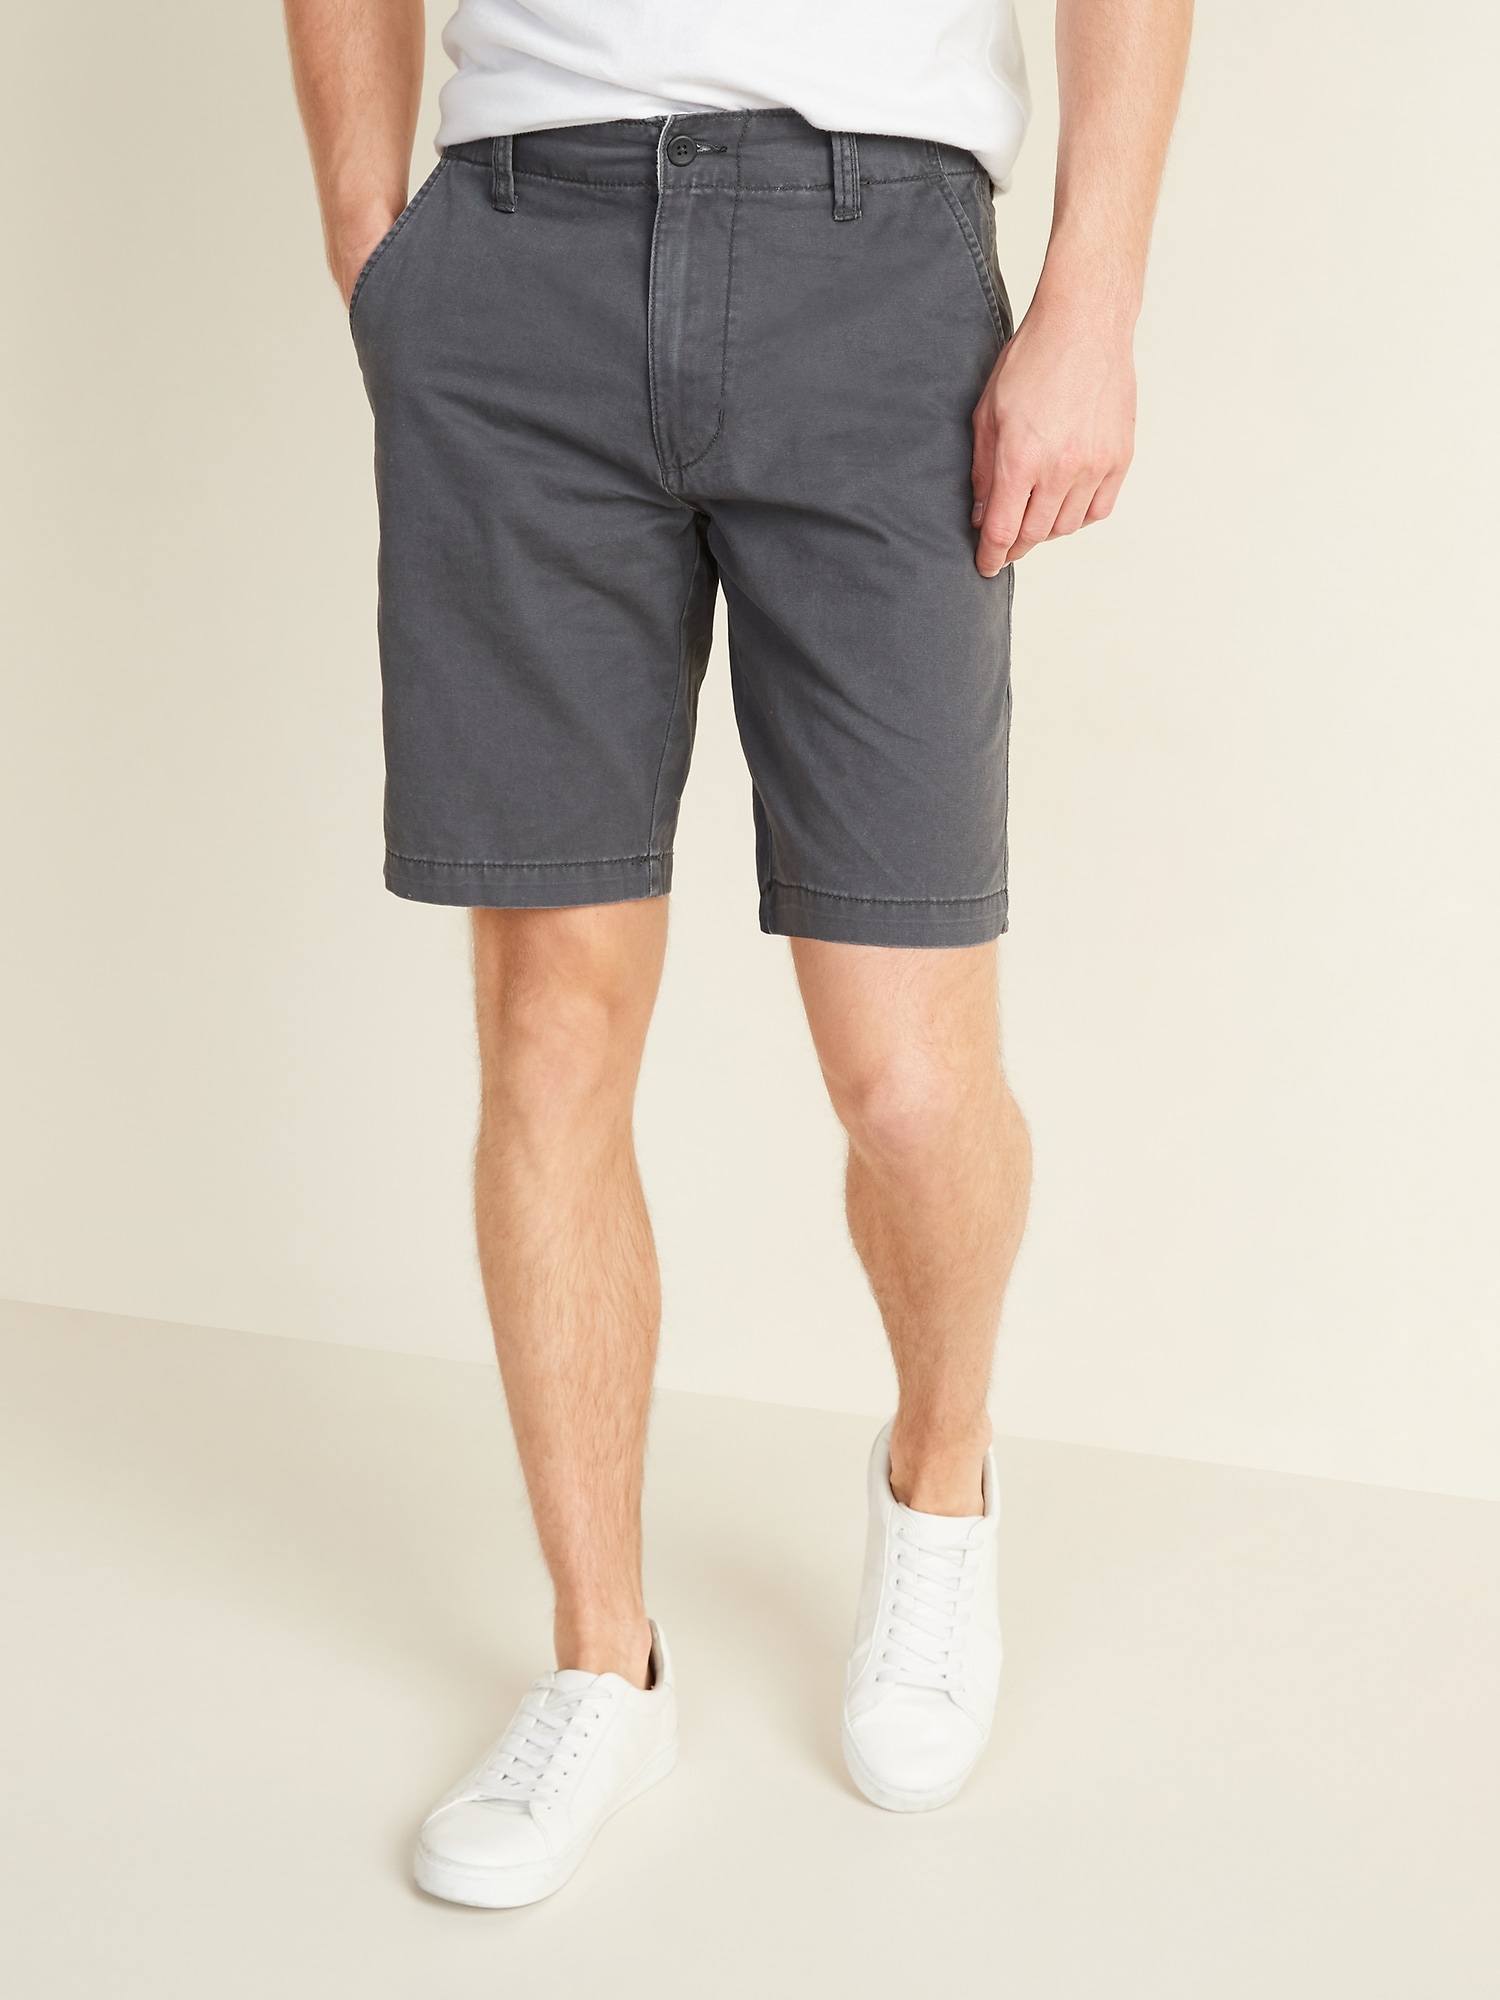 Lived-In Straight Khaki Shorts for Men - 10-inch inseam